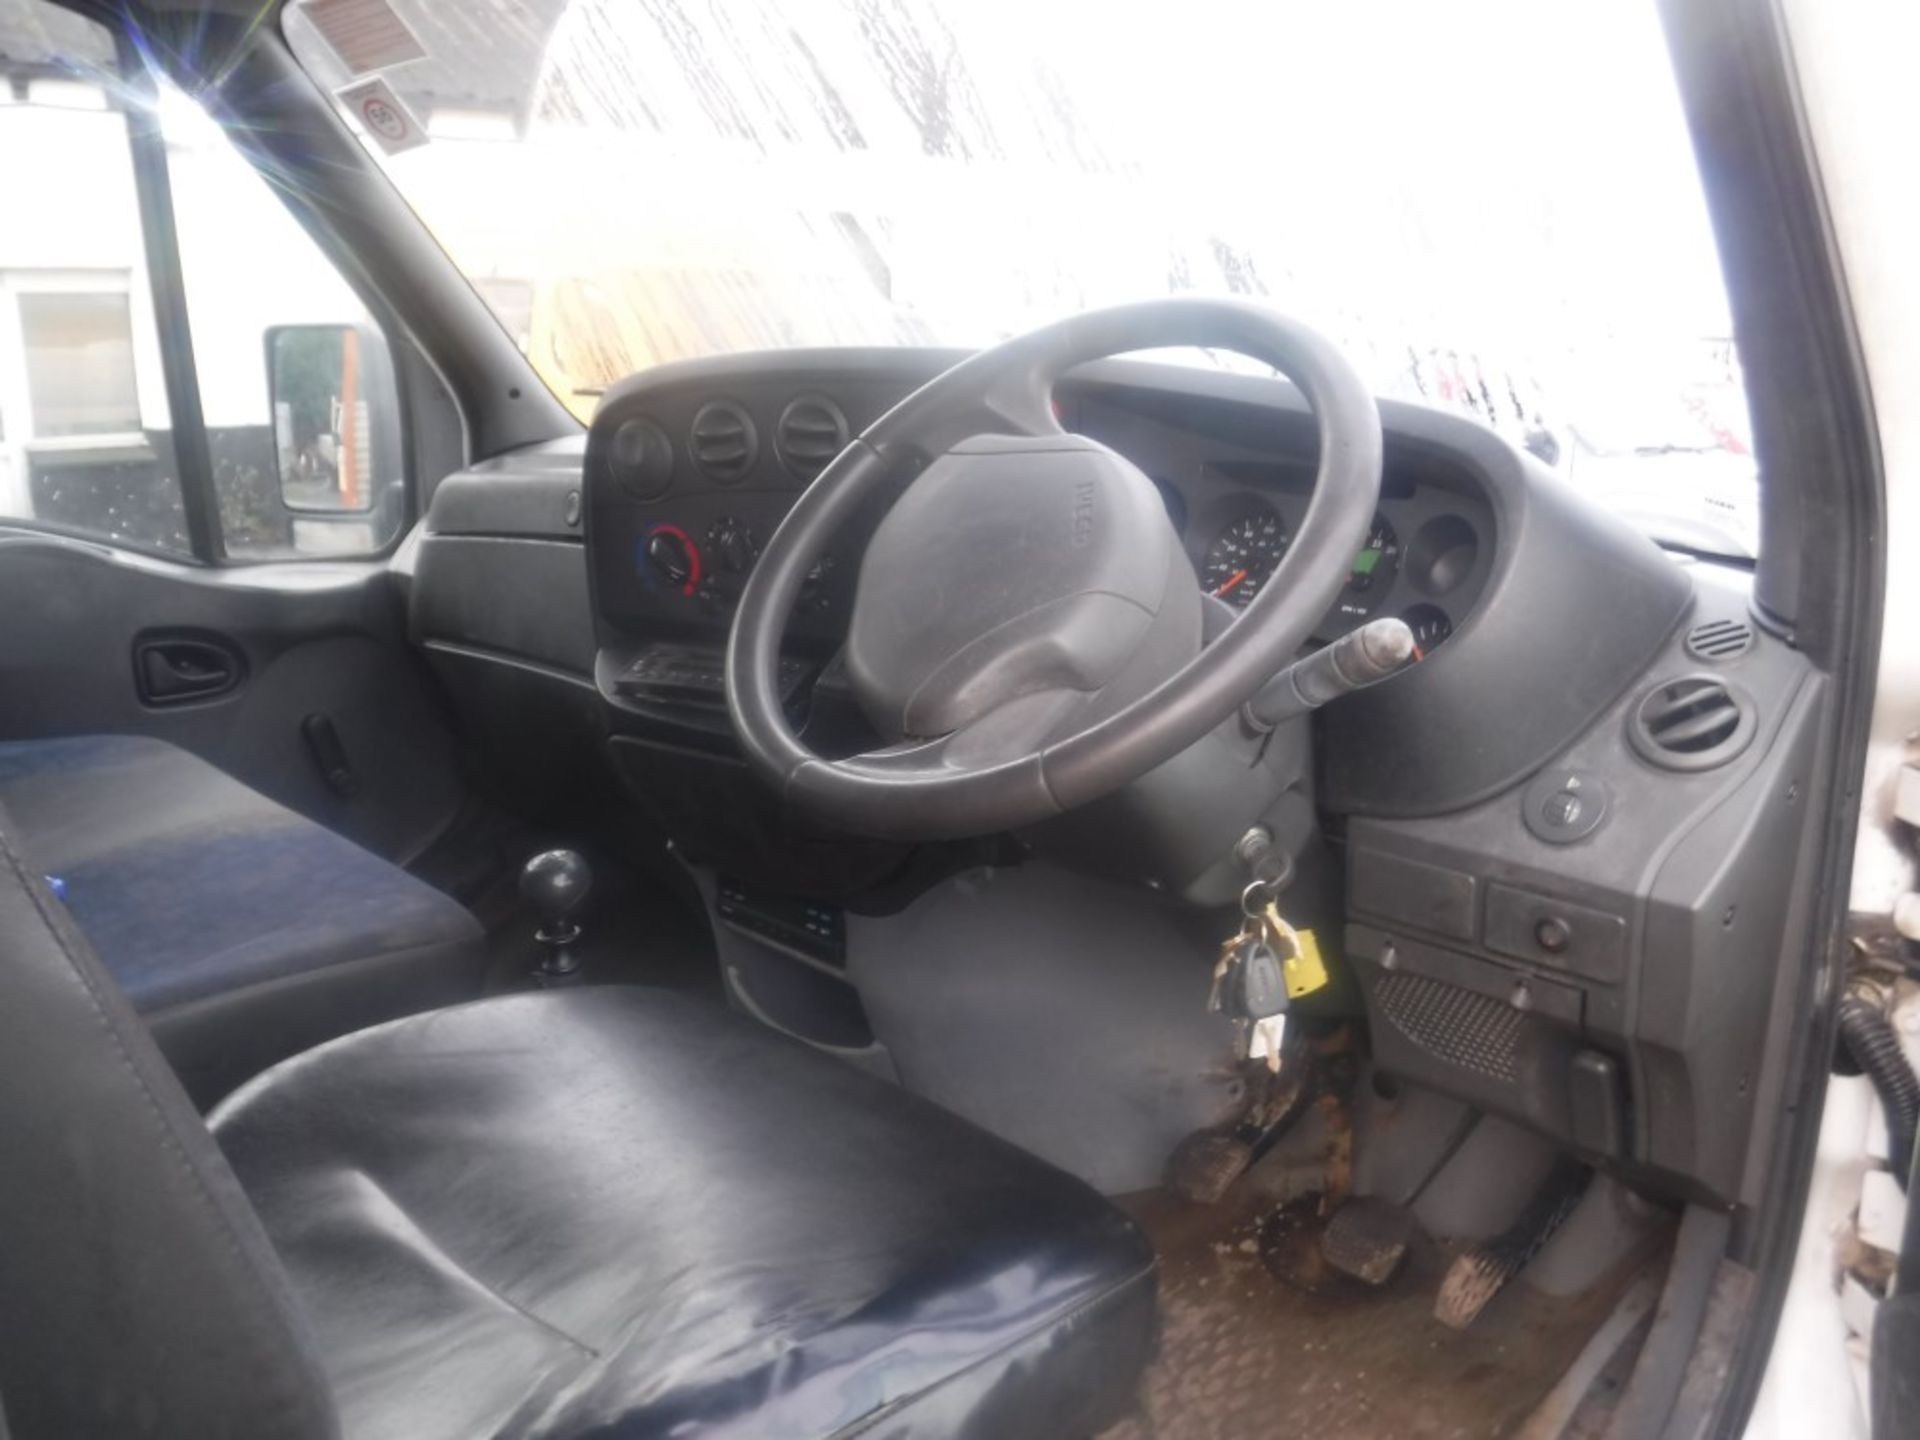 54 reg IVECO DAILY 50C17 DROPSIDE, SWING CRANE, 7 SEATER CAB, 1ST REG 11/05, TEST 01/20, 58011KM - Image 5 of 5